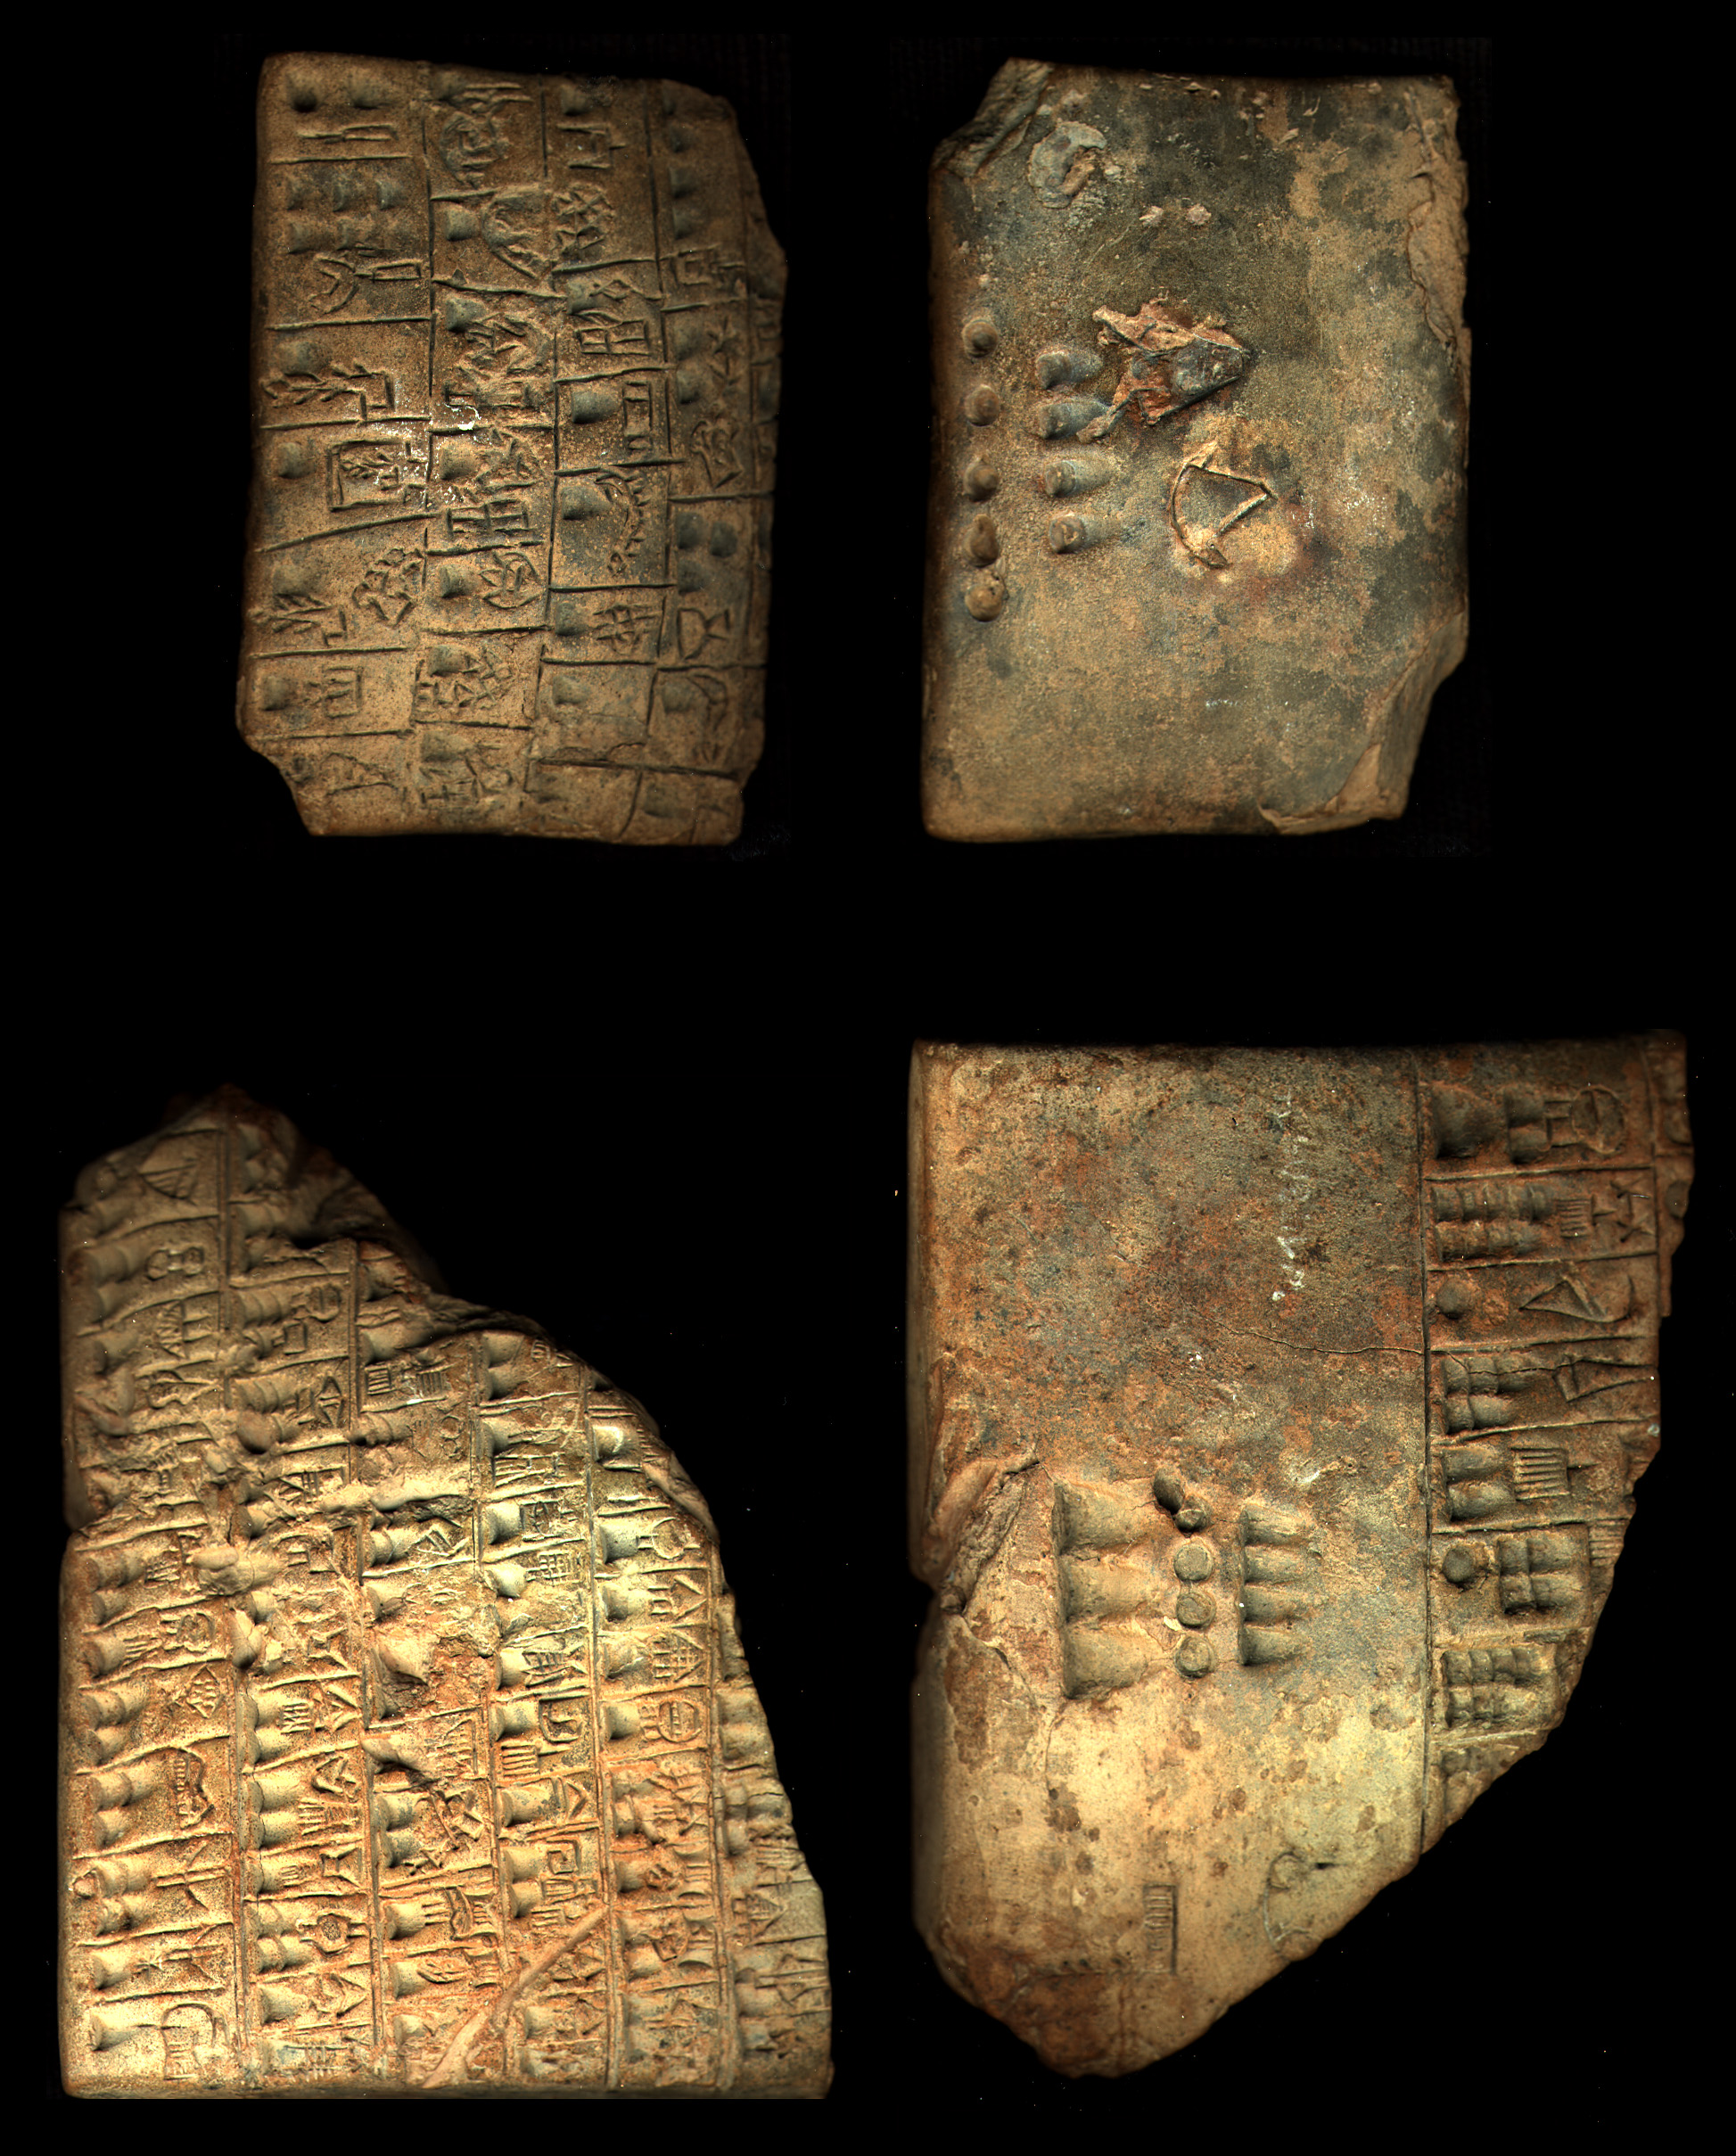 Examples of Uruk IV (above, excavation no. W 7227,a) and Uruk III (below, no. W 14804,a